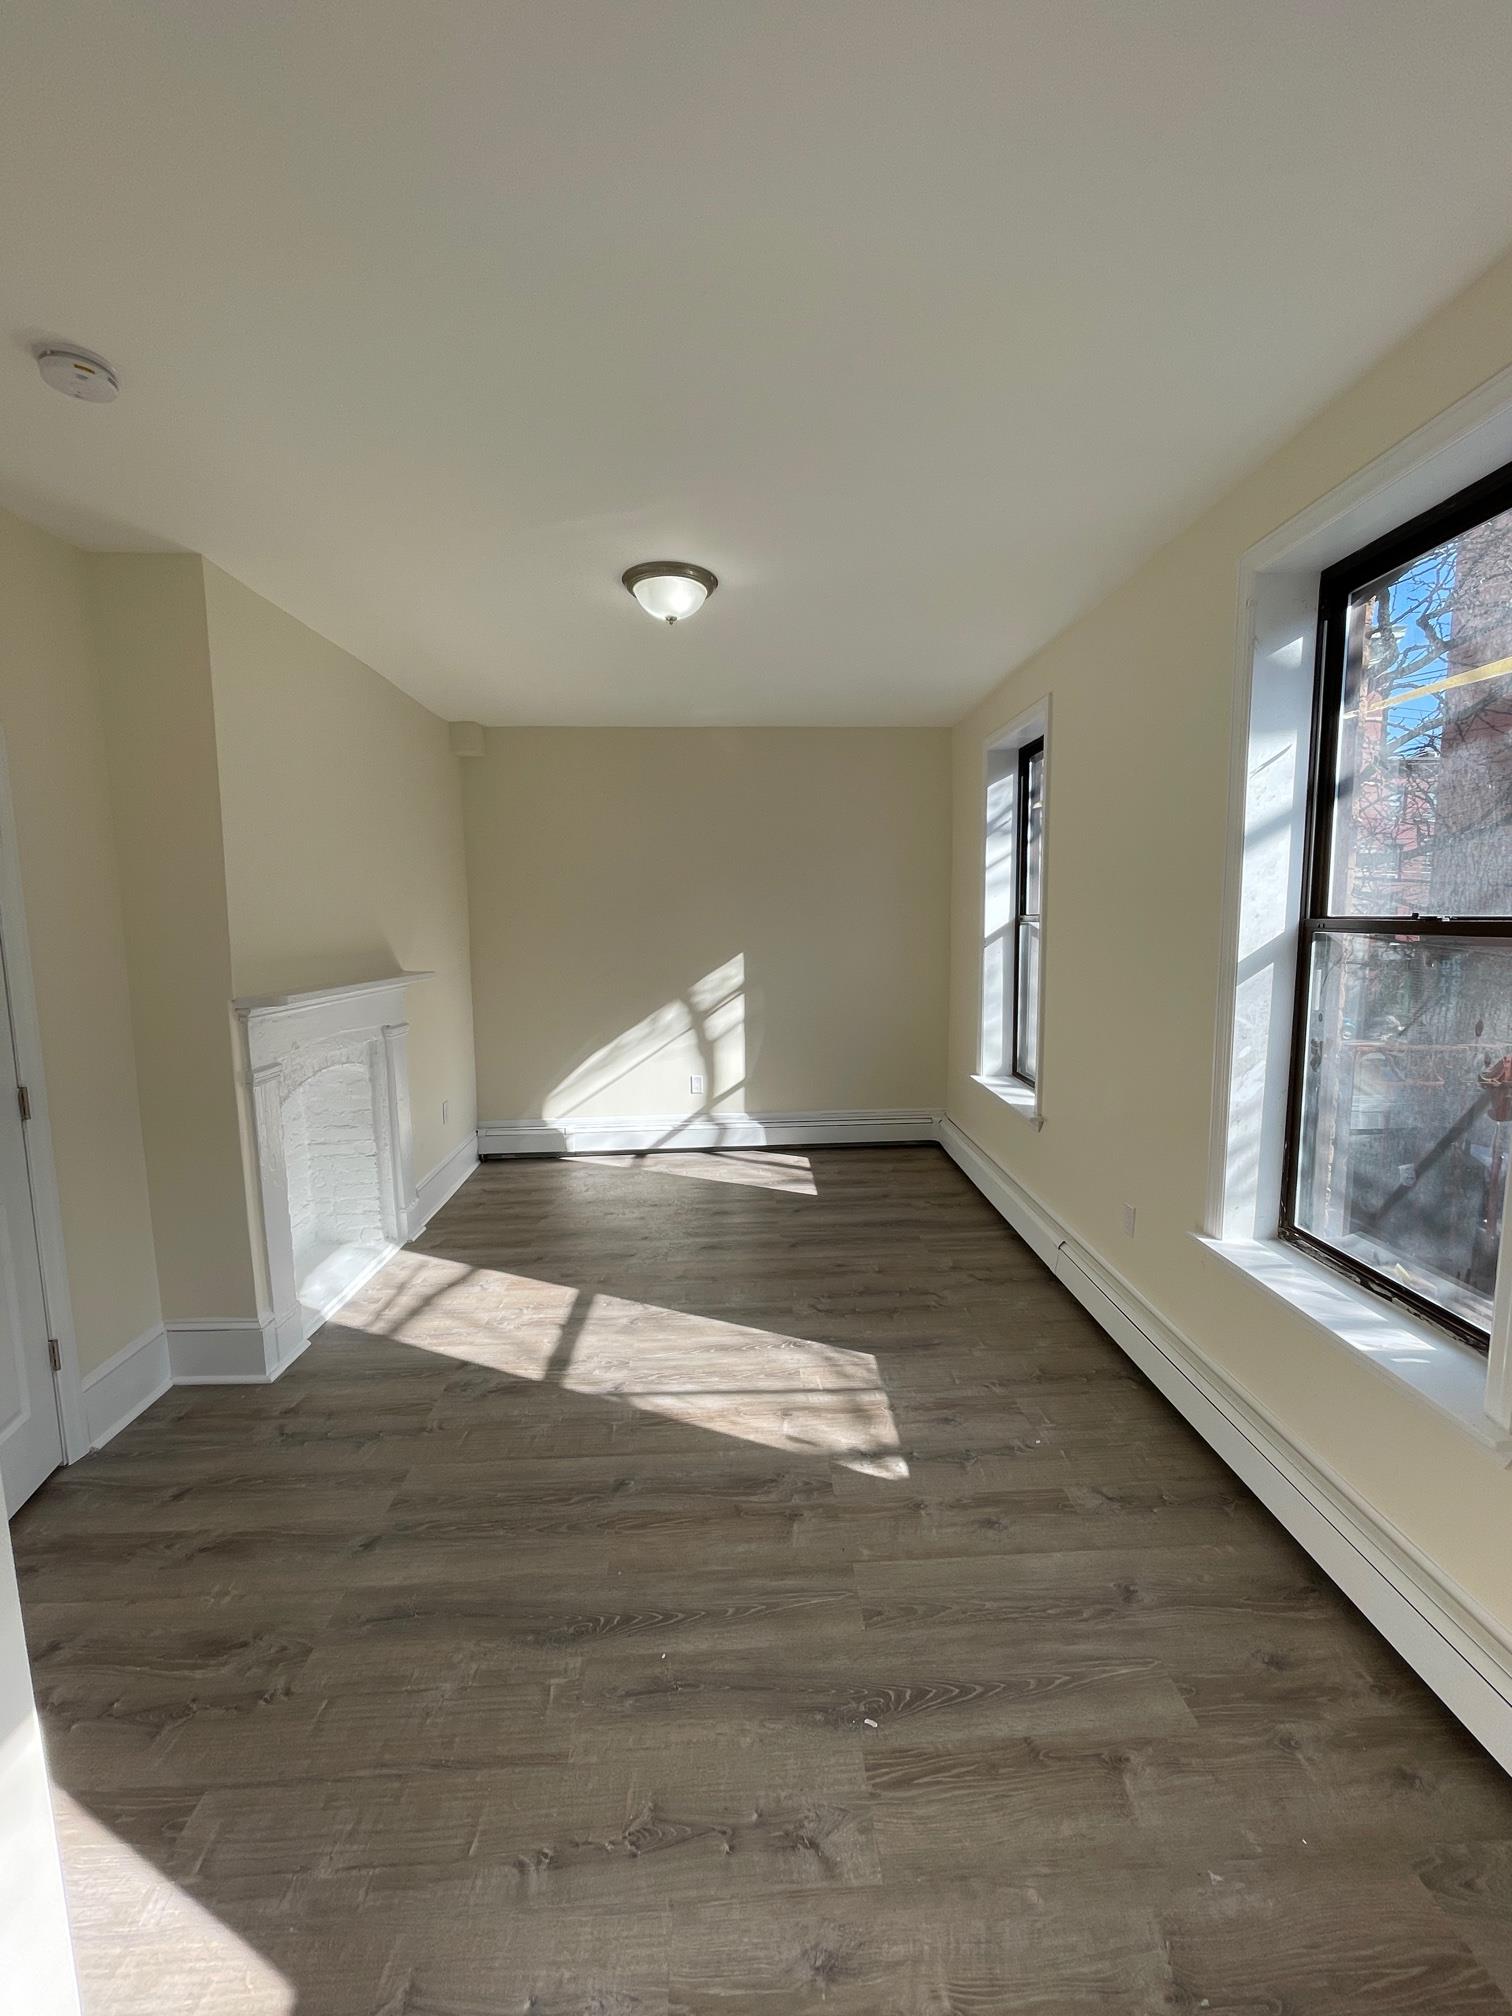 Fantastic newly renovated apartment. Features include: dishwasher, stainless steel appliances, hardwood floors, updated bathroom & plenty of windows filling this home with great natural light. Amazing location, laundry at the base of the building. 
